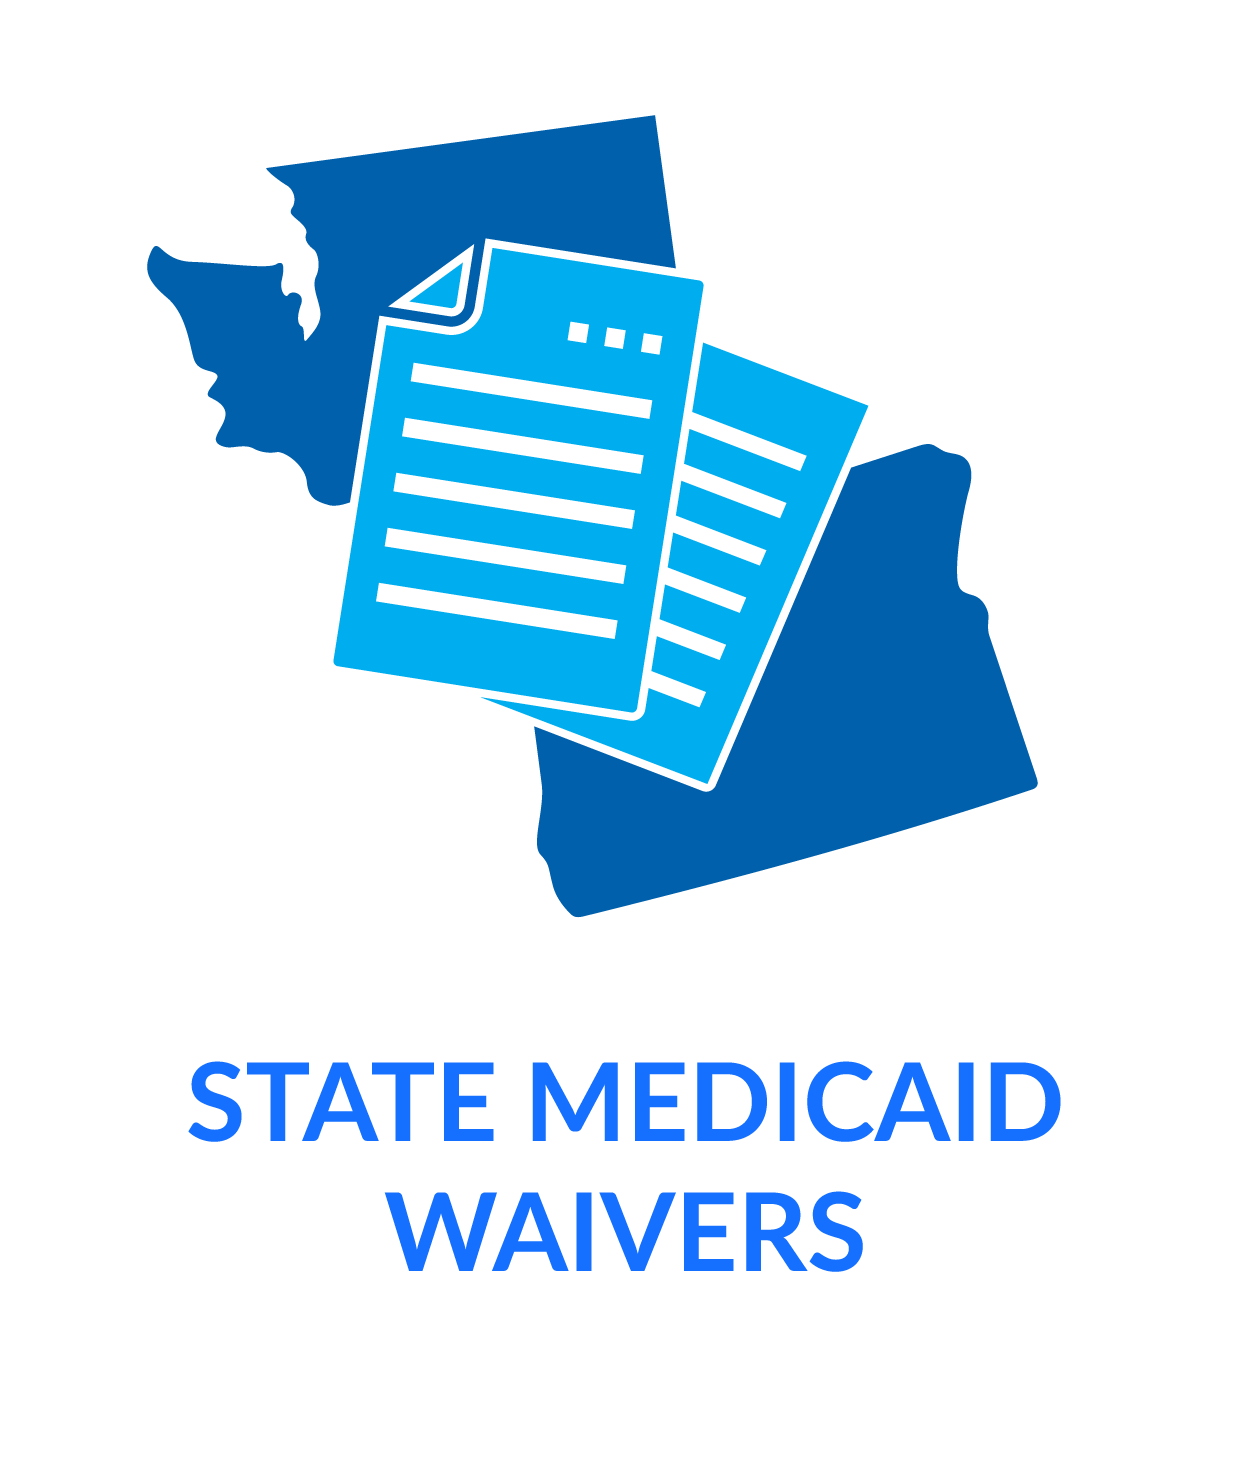 State Medicaid Waivers